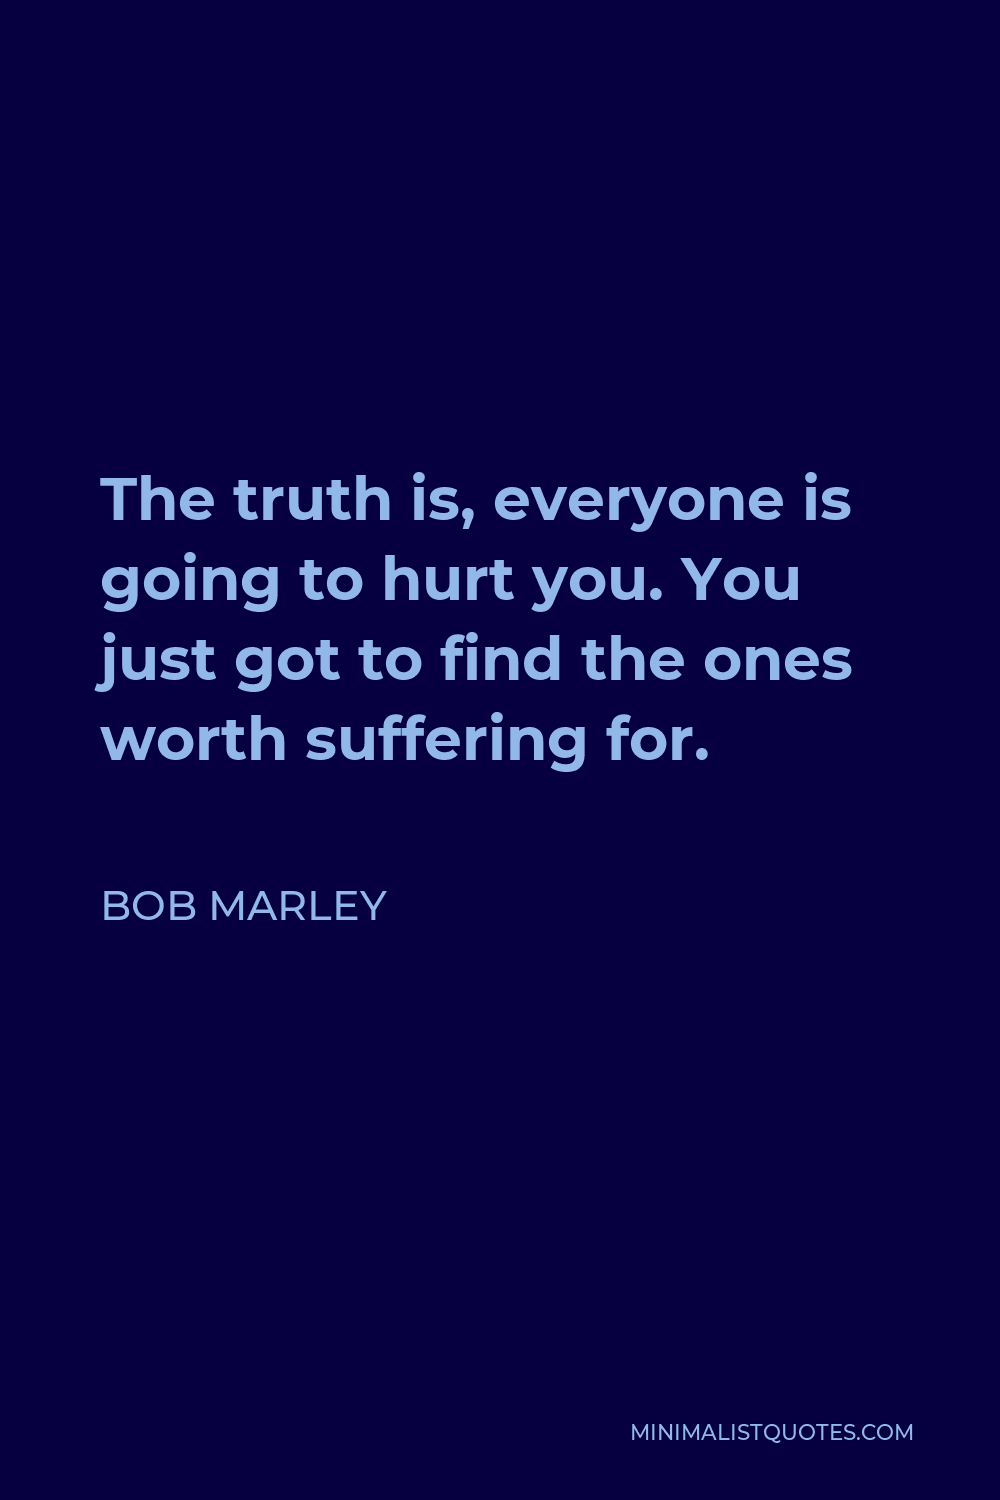 Bob Marley Quote: The truth is, everyone is going to hurt you. You just ...